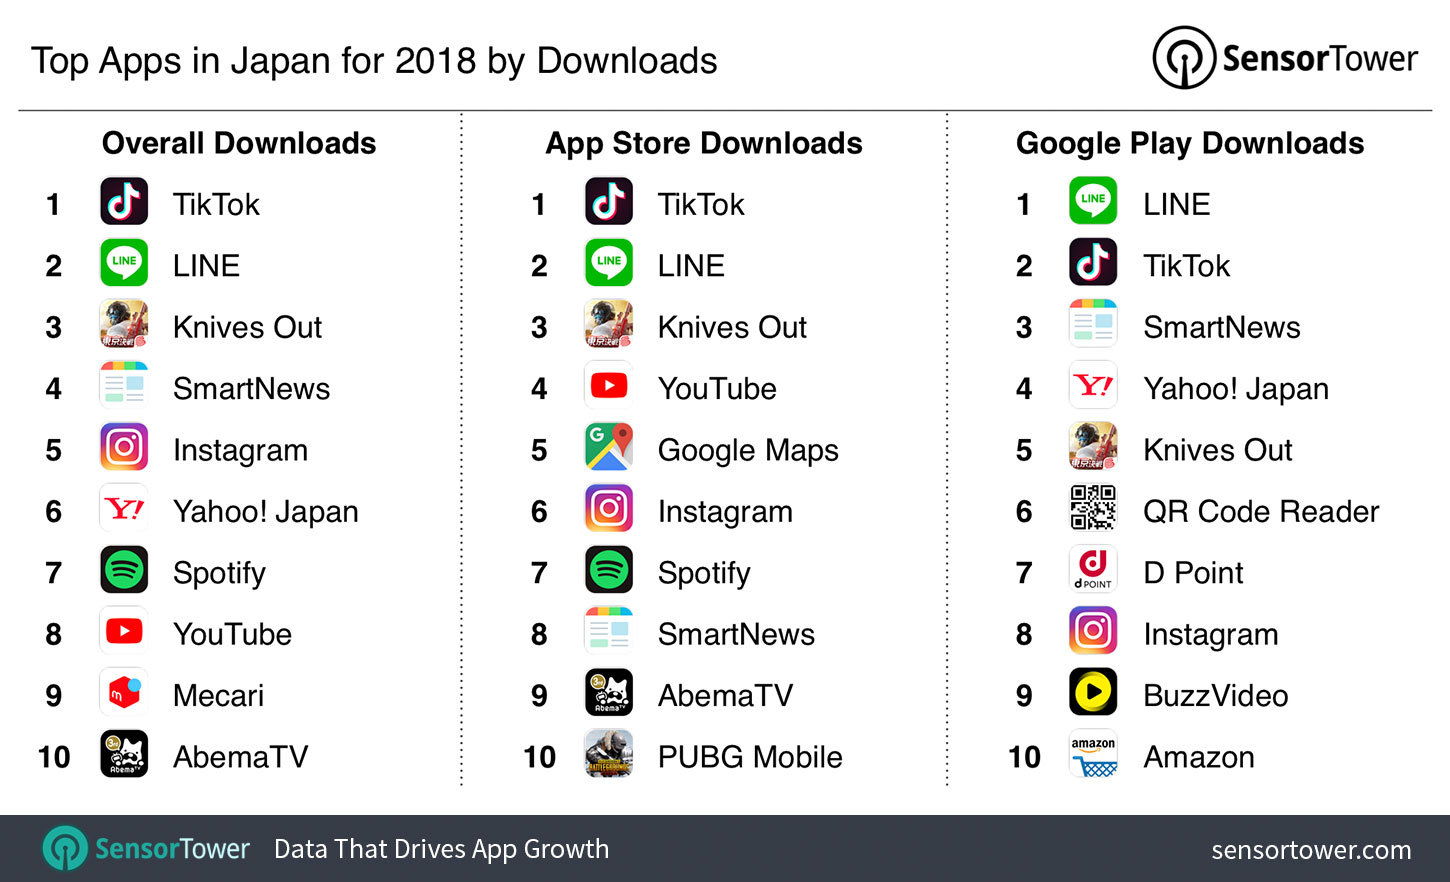 Top Apps in Japan for 2018 by Downloads